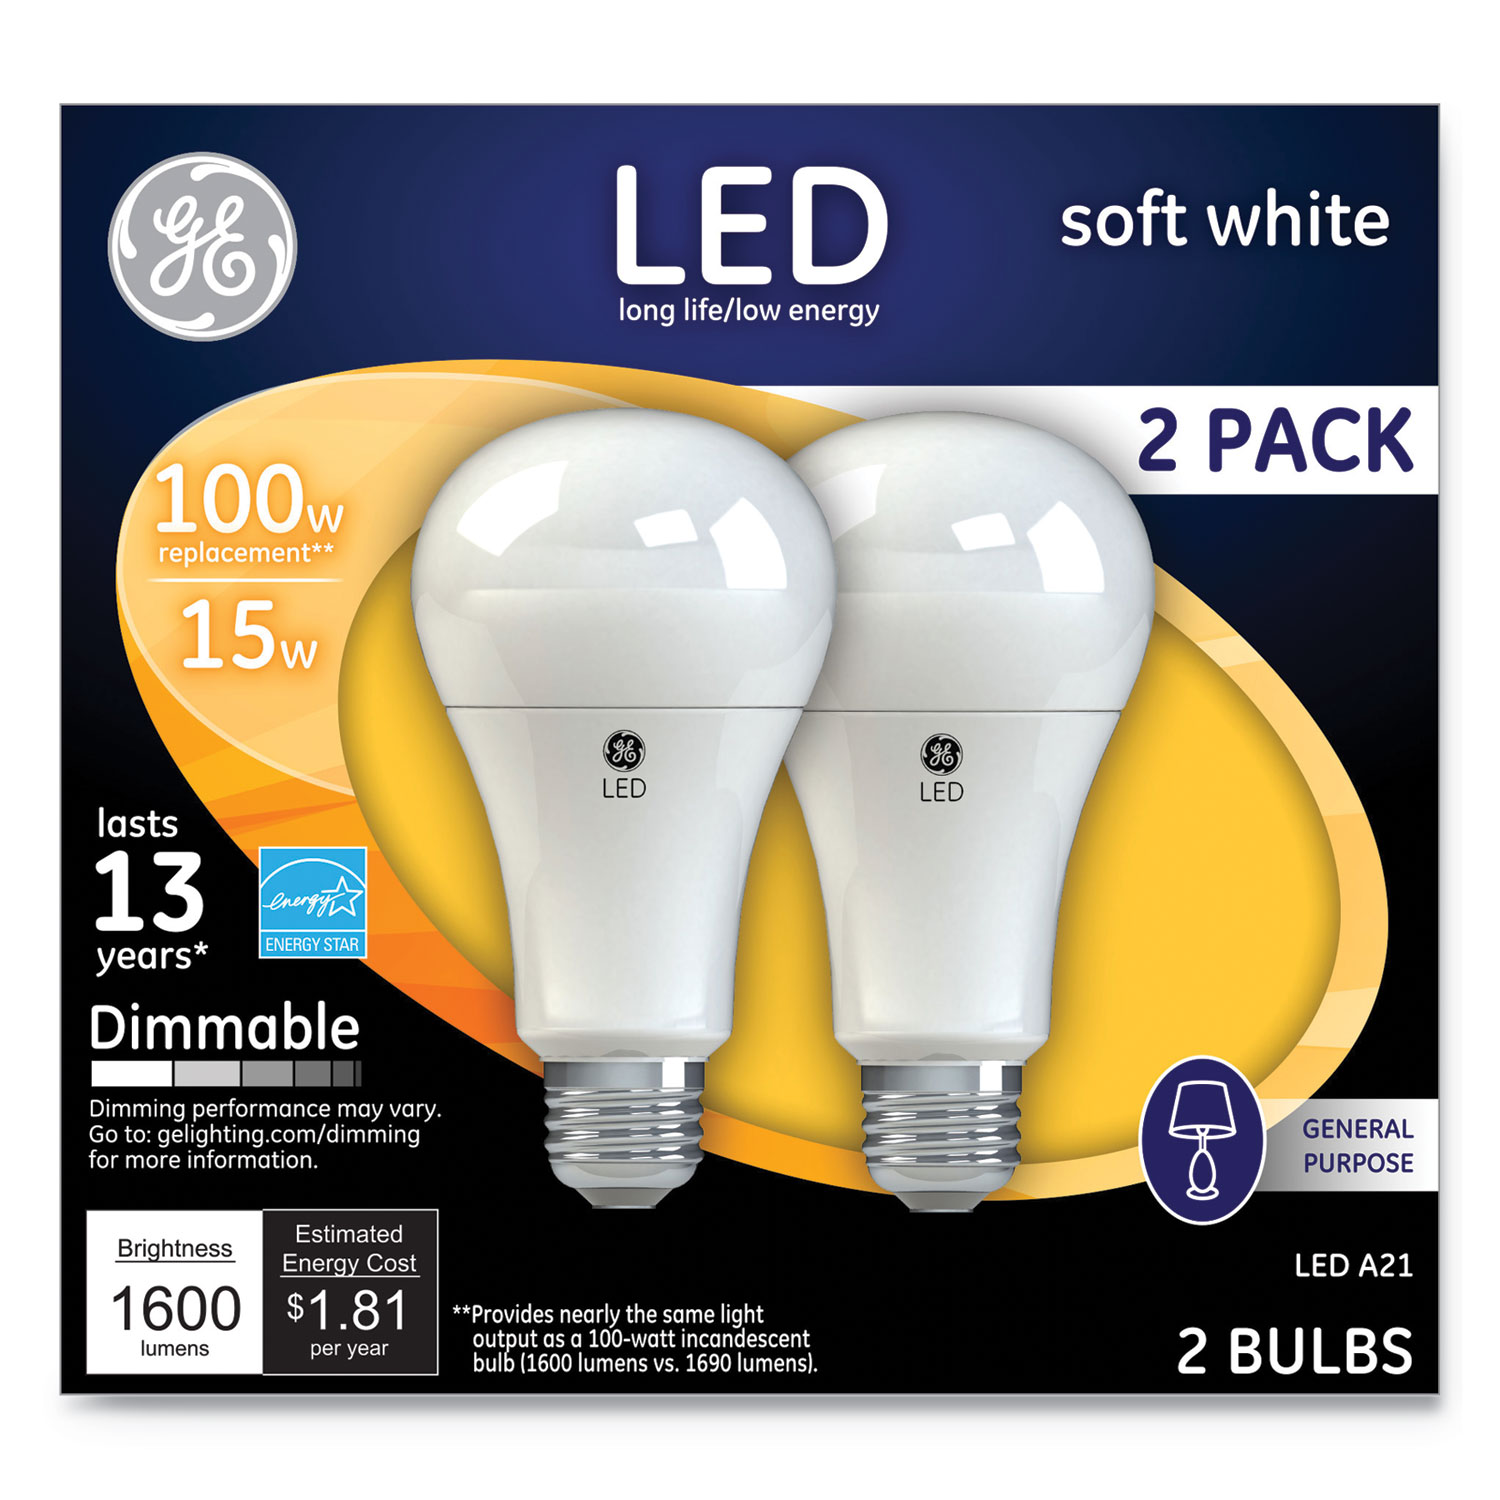  GE 65941 LED Soft White A21 Dimmable Light Bulb, 15 W, 2/Pack (GEL65941) 